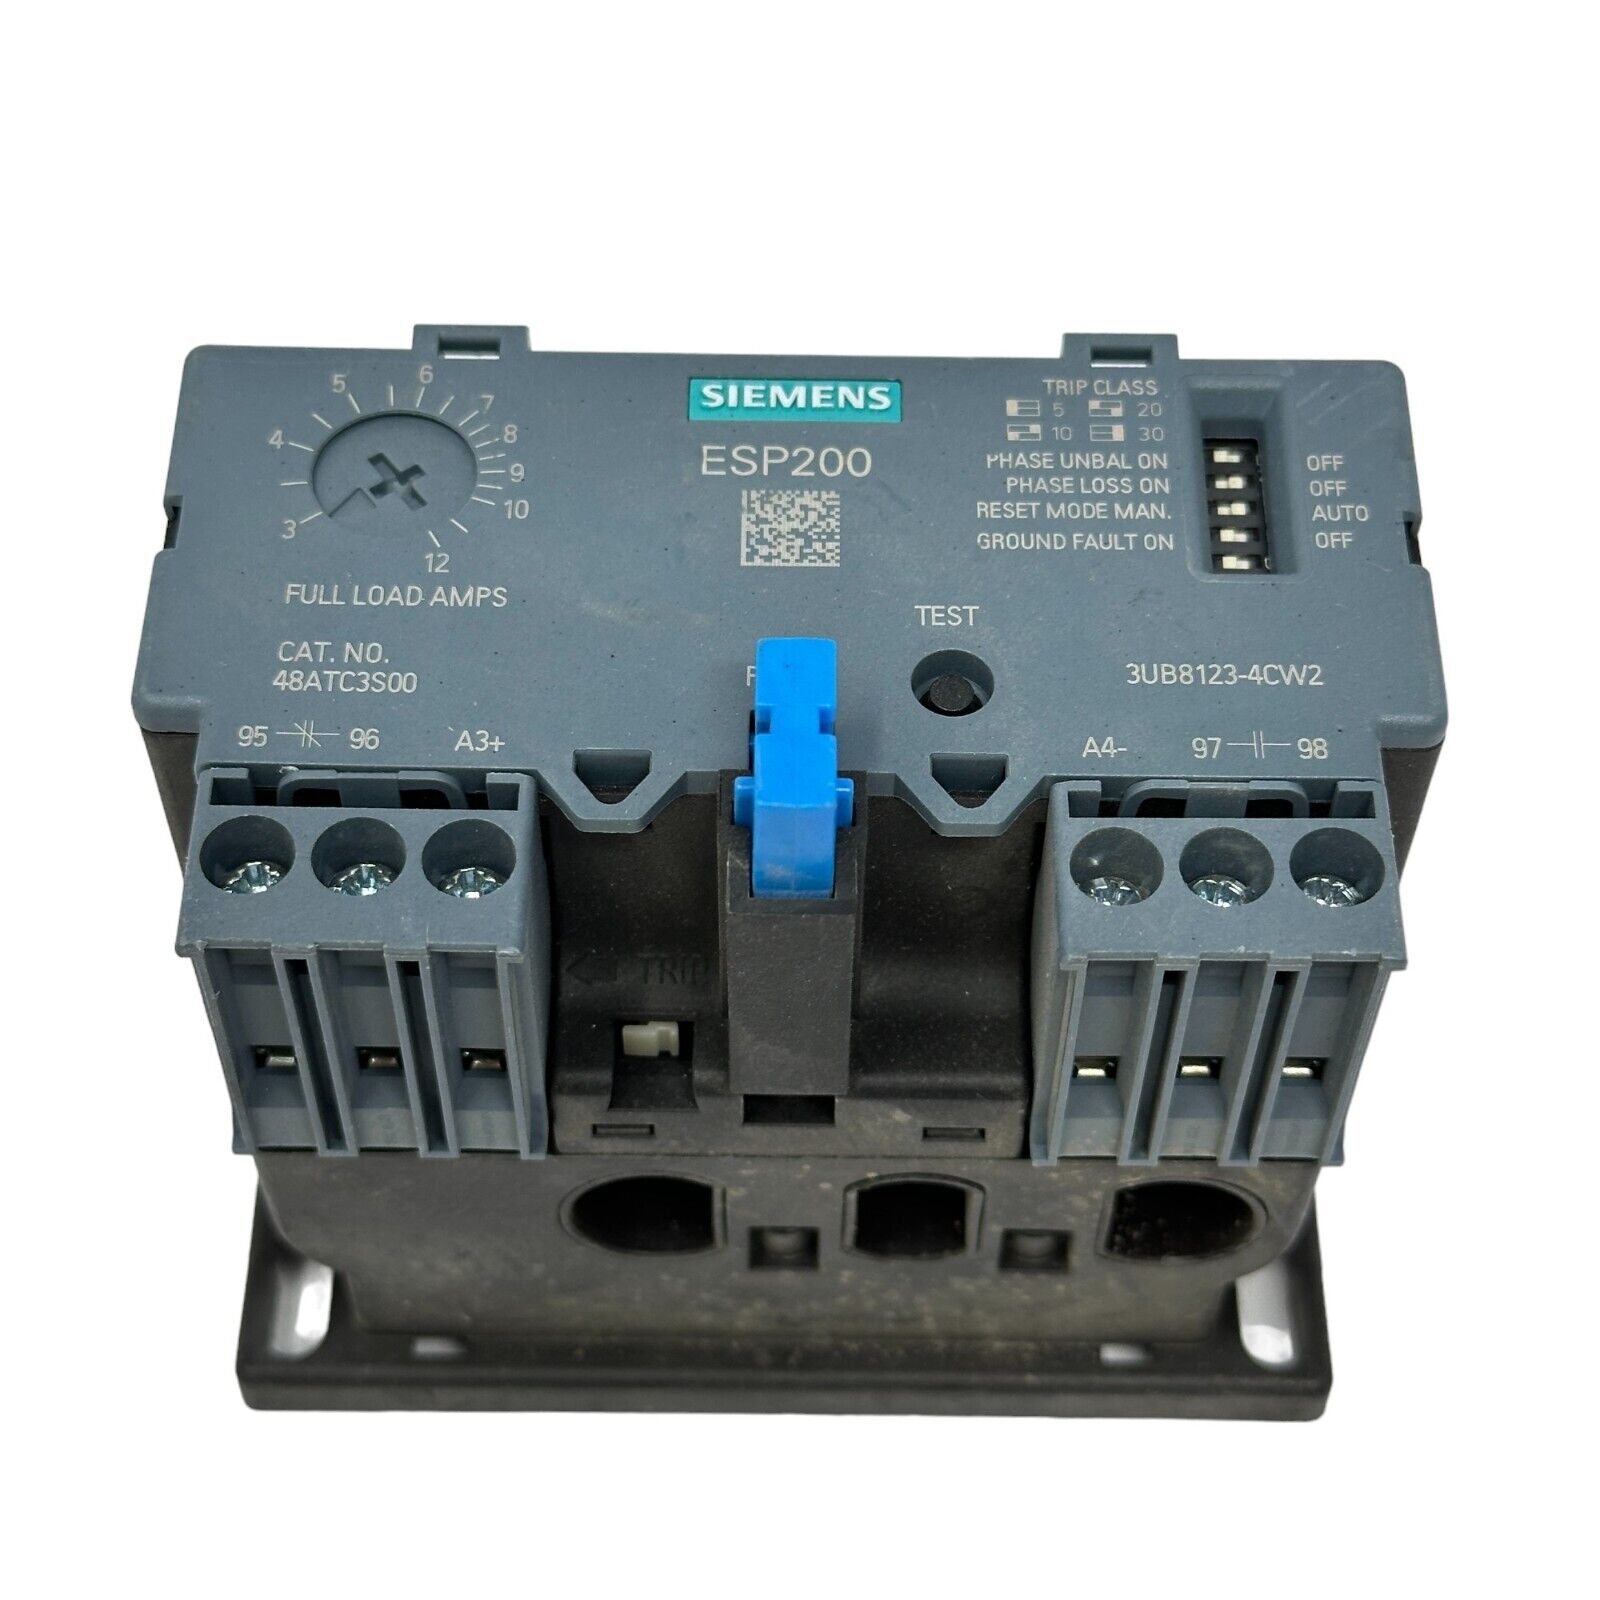 Siemens ESP200 3UB8123-4CW2 Solid State Overload Relay 3-12A 3-Phase Size A1